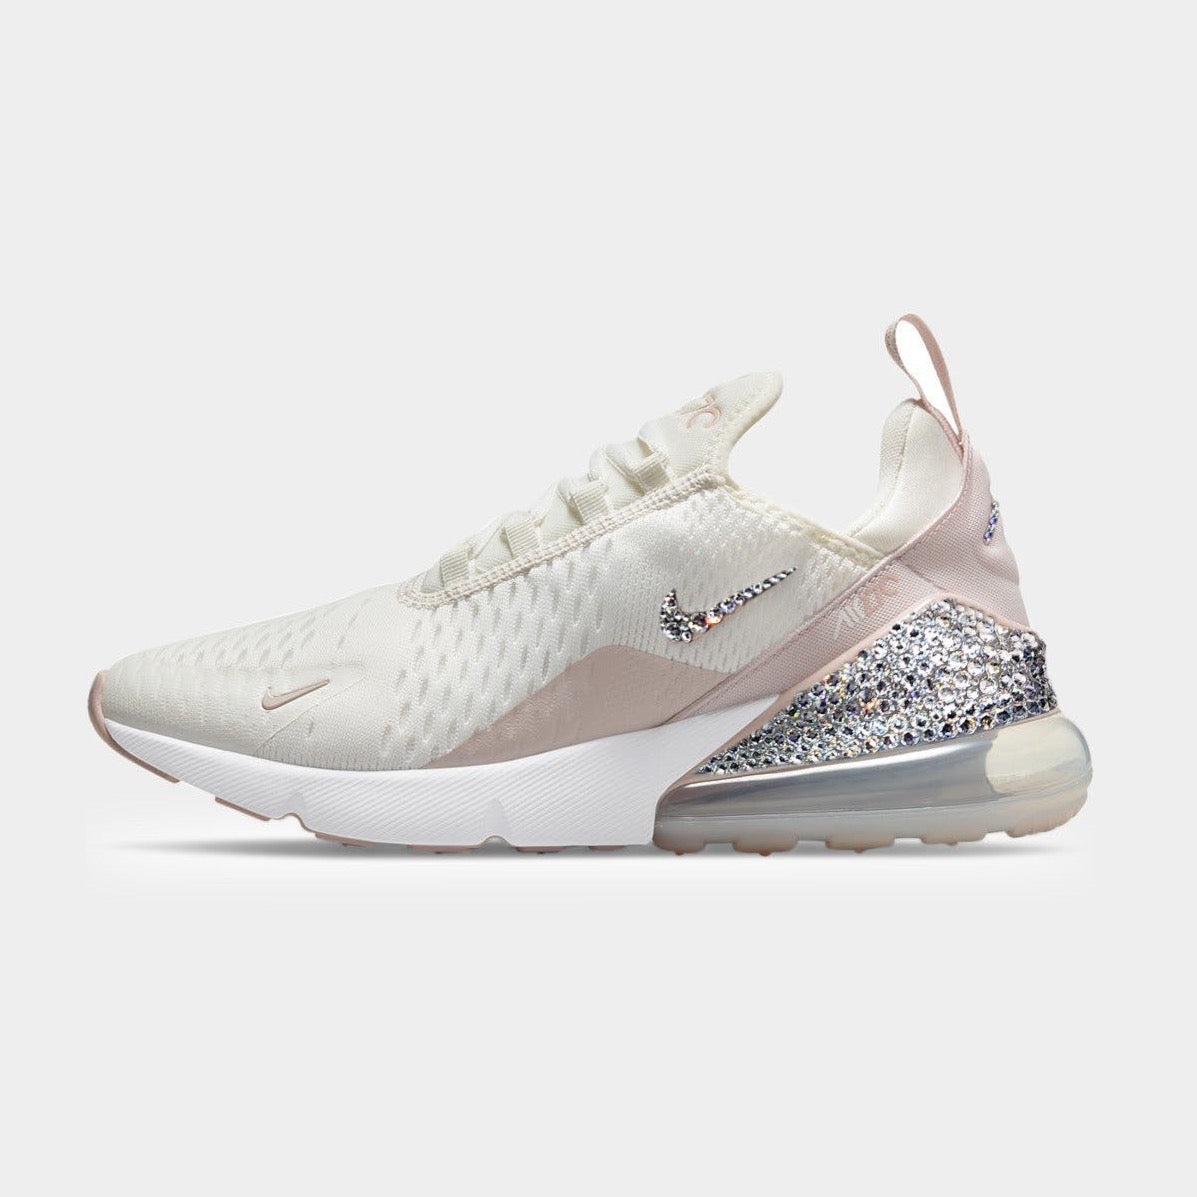 nike women's shoes limited edition